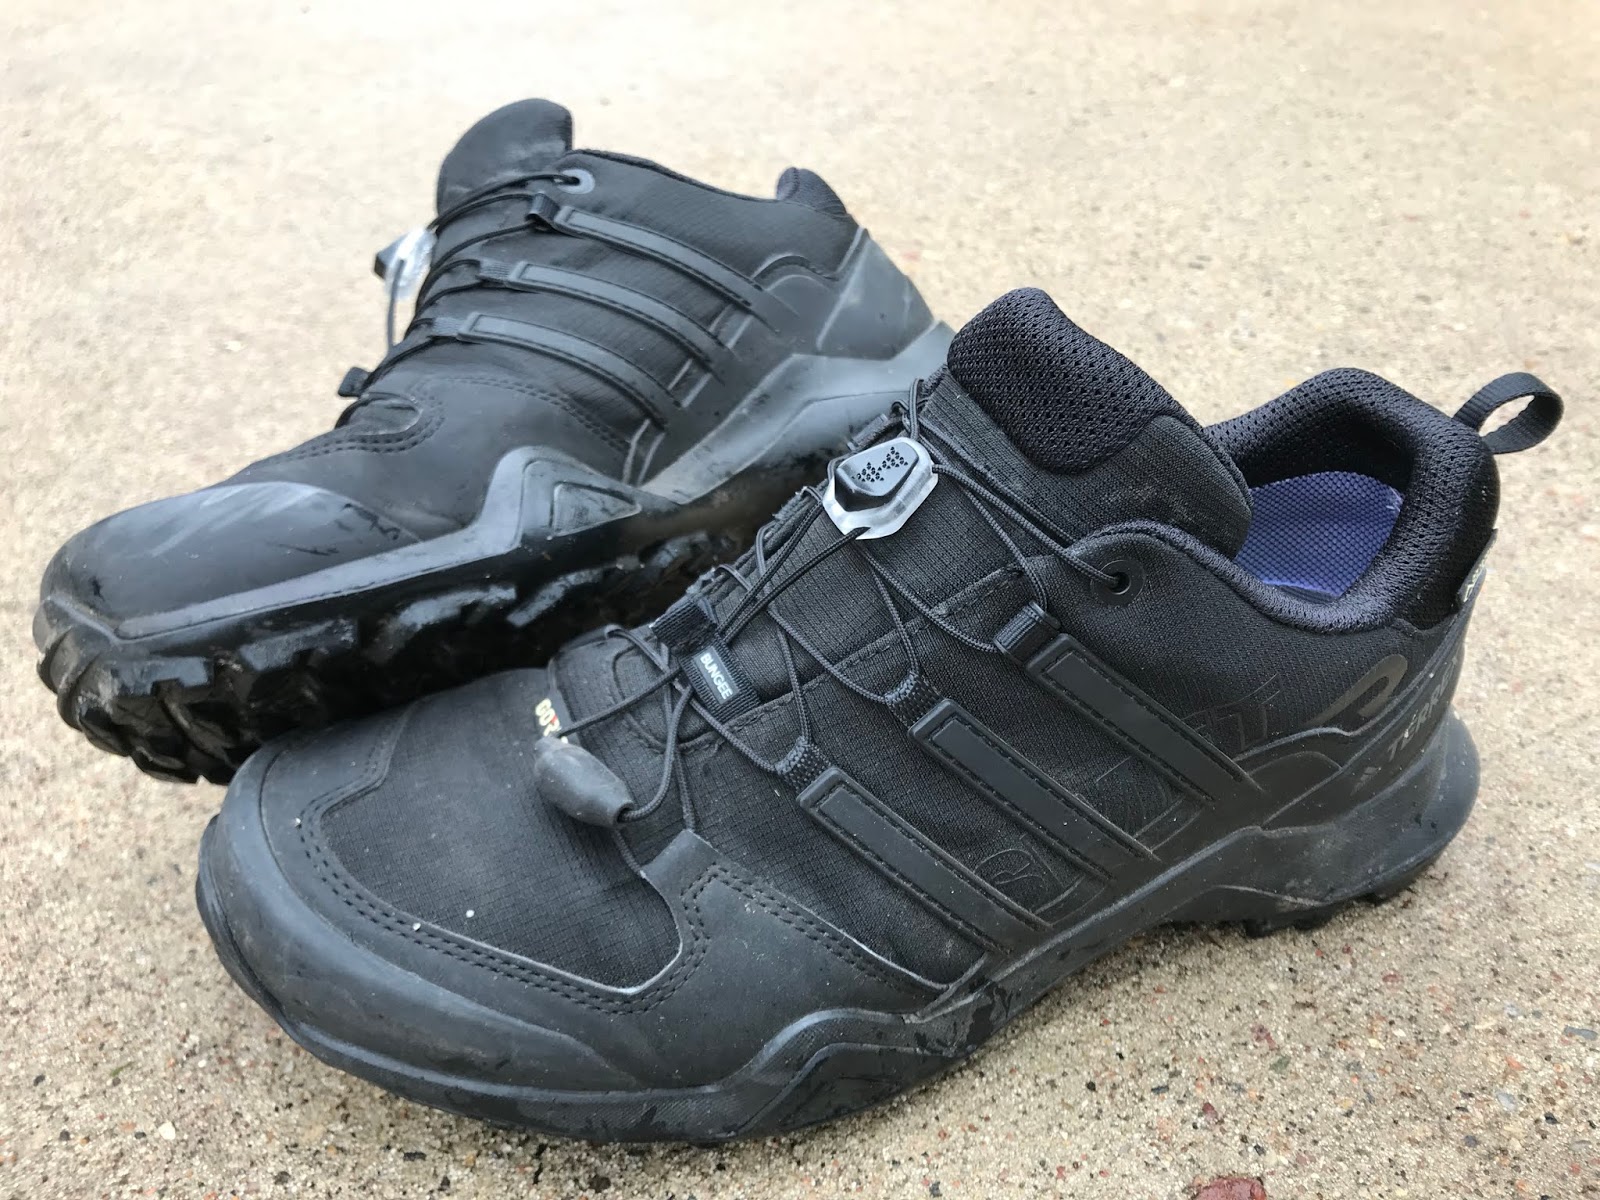 adidas Terex Swift R2 GTX Initial Review - DOCTORS OF RUNNING